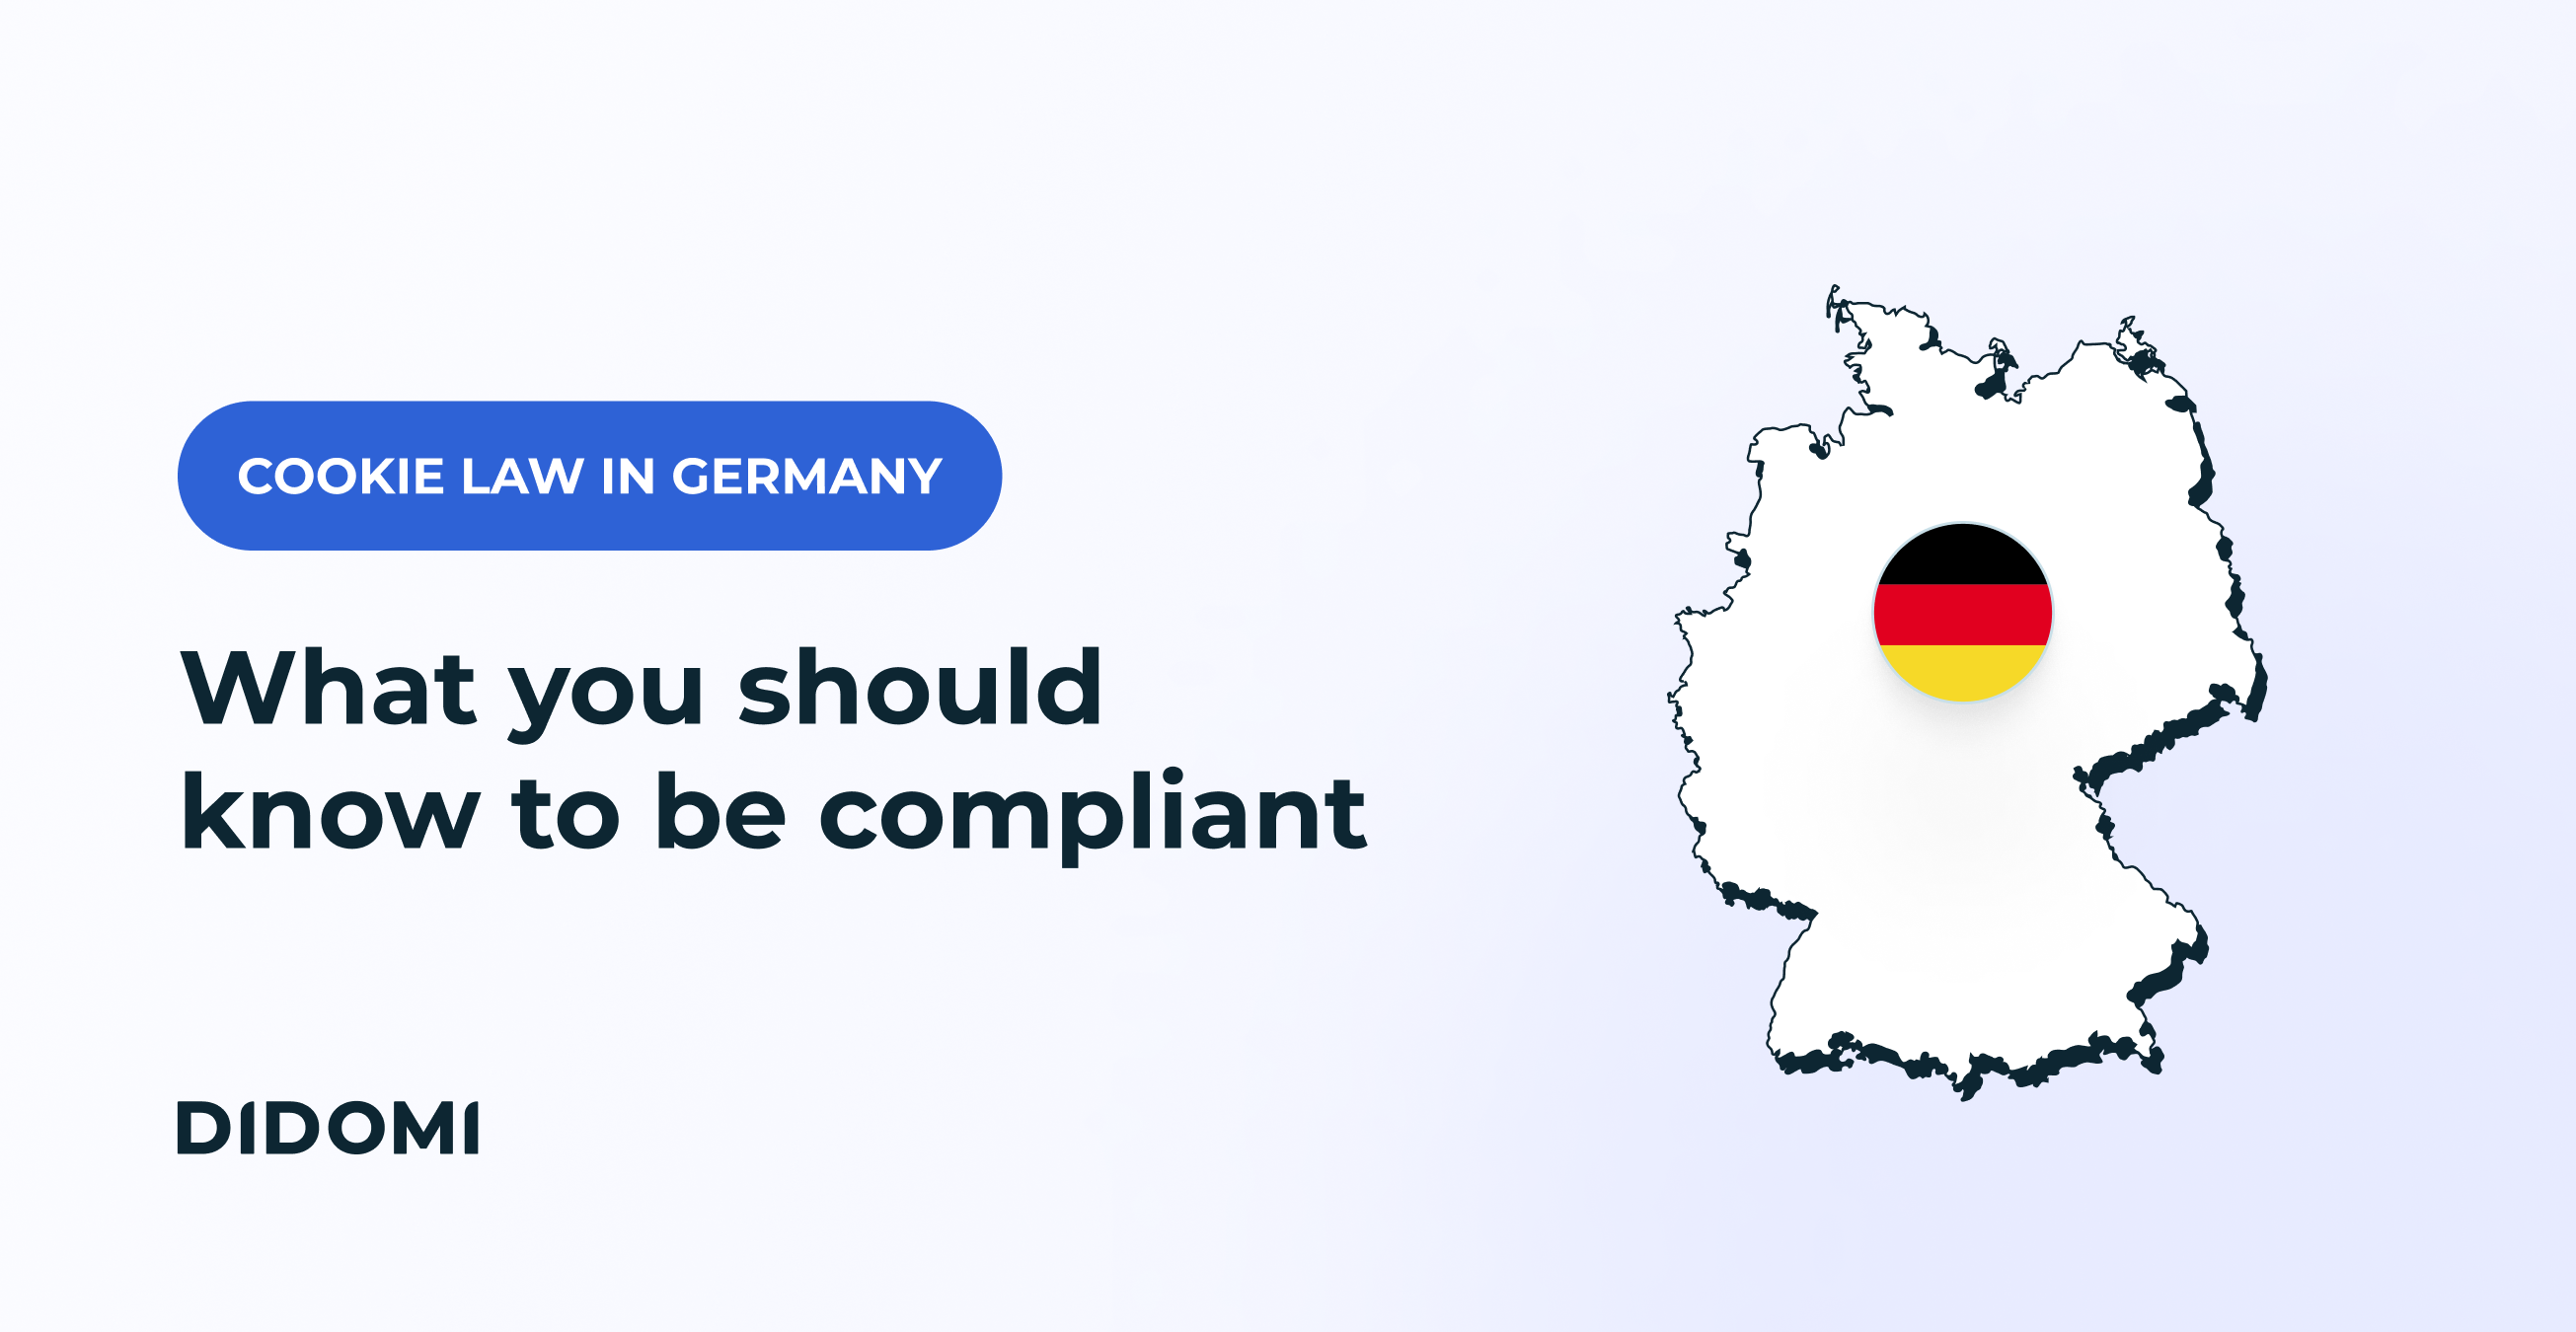 Image with a drawing of the map of Germany along with its flag on the right, and the title of the blog post on the left "Everything you should know to be compliant" with the tag "Germany cookie law"